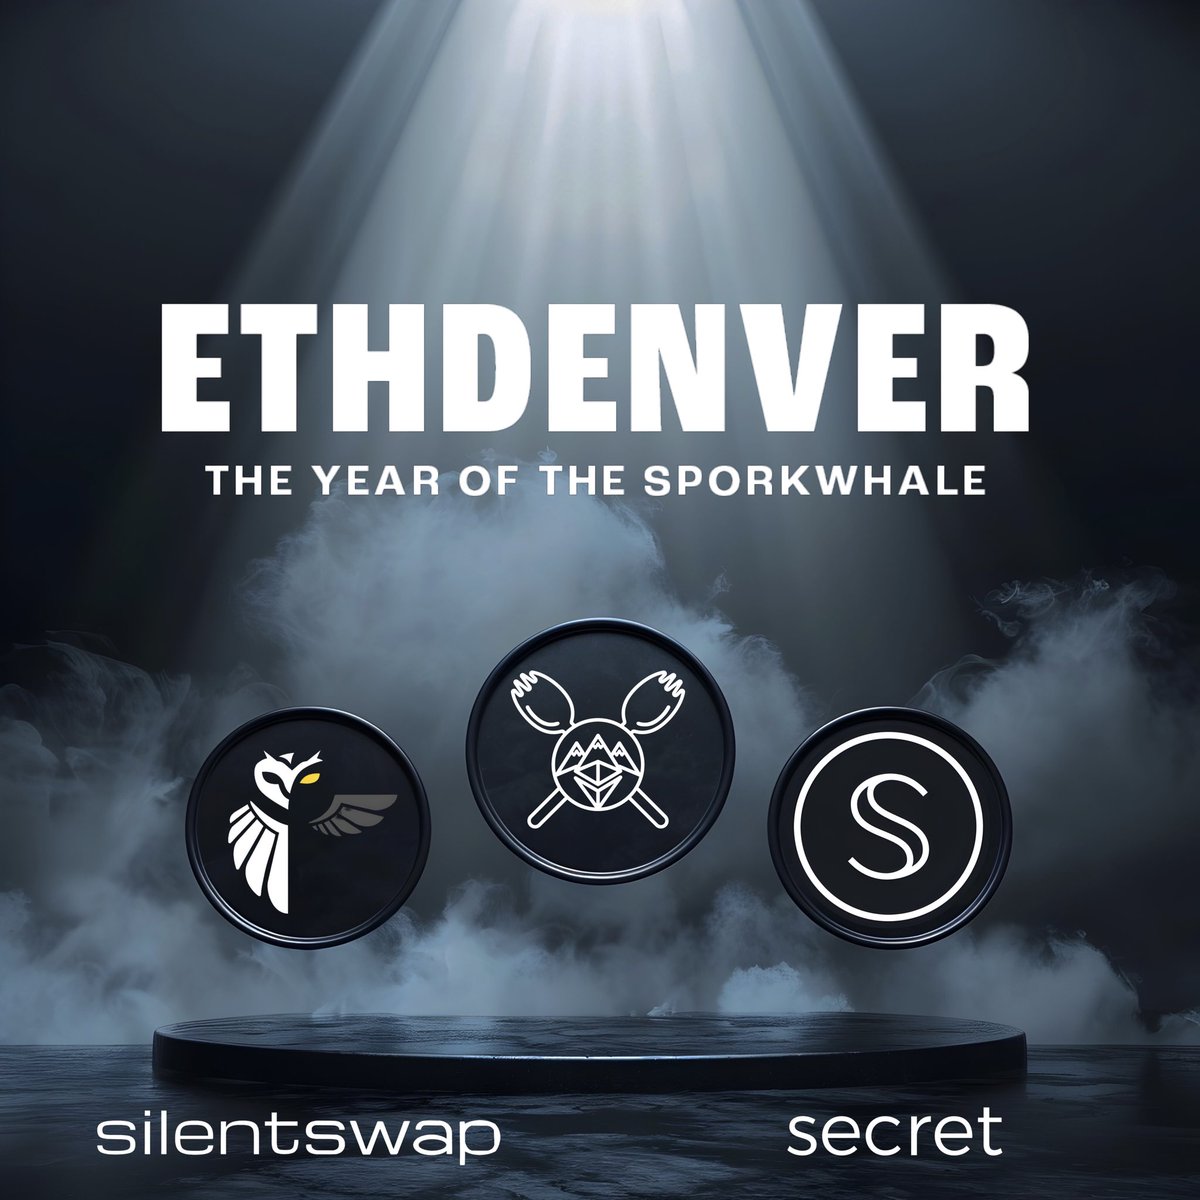 SilentSwap will be featured on the @SecretNetwork booth at ETHDenver! If you're attending, keep an eye out for it 👀